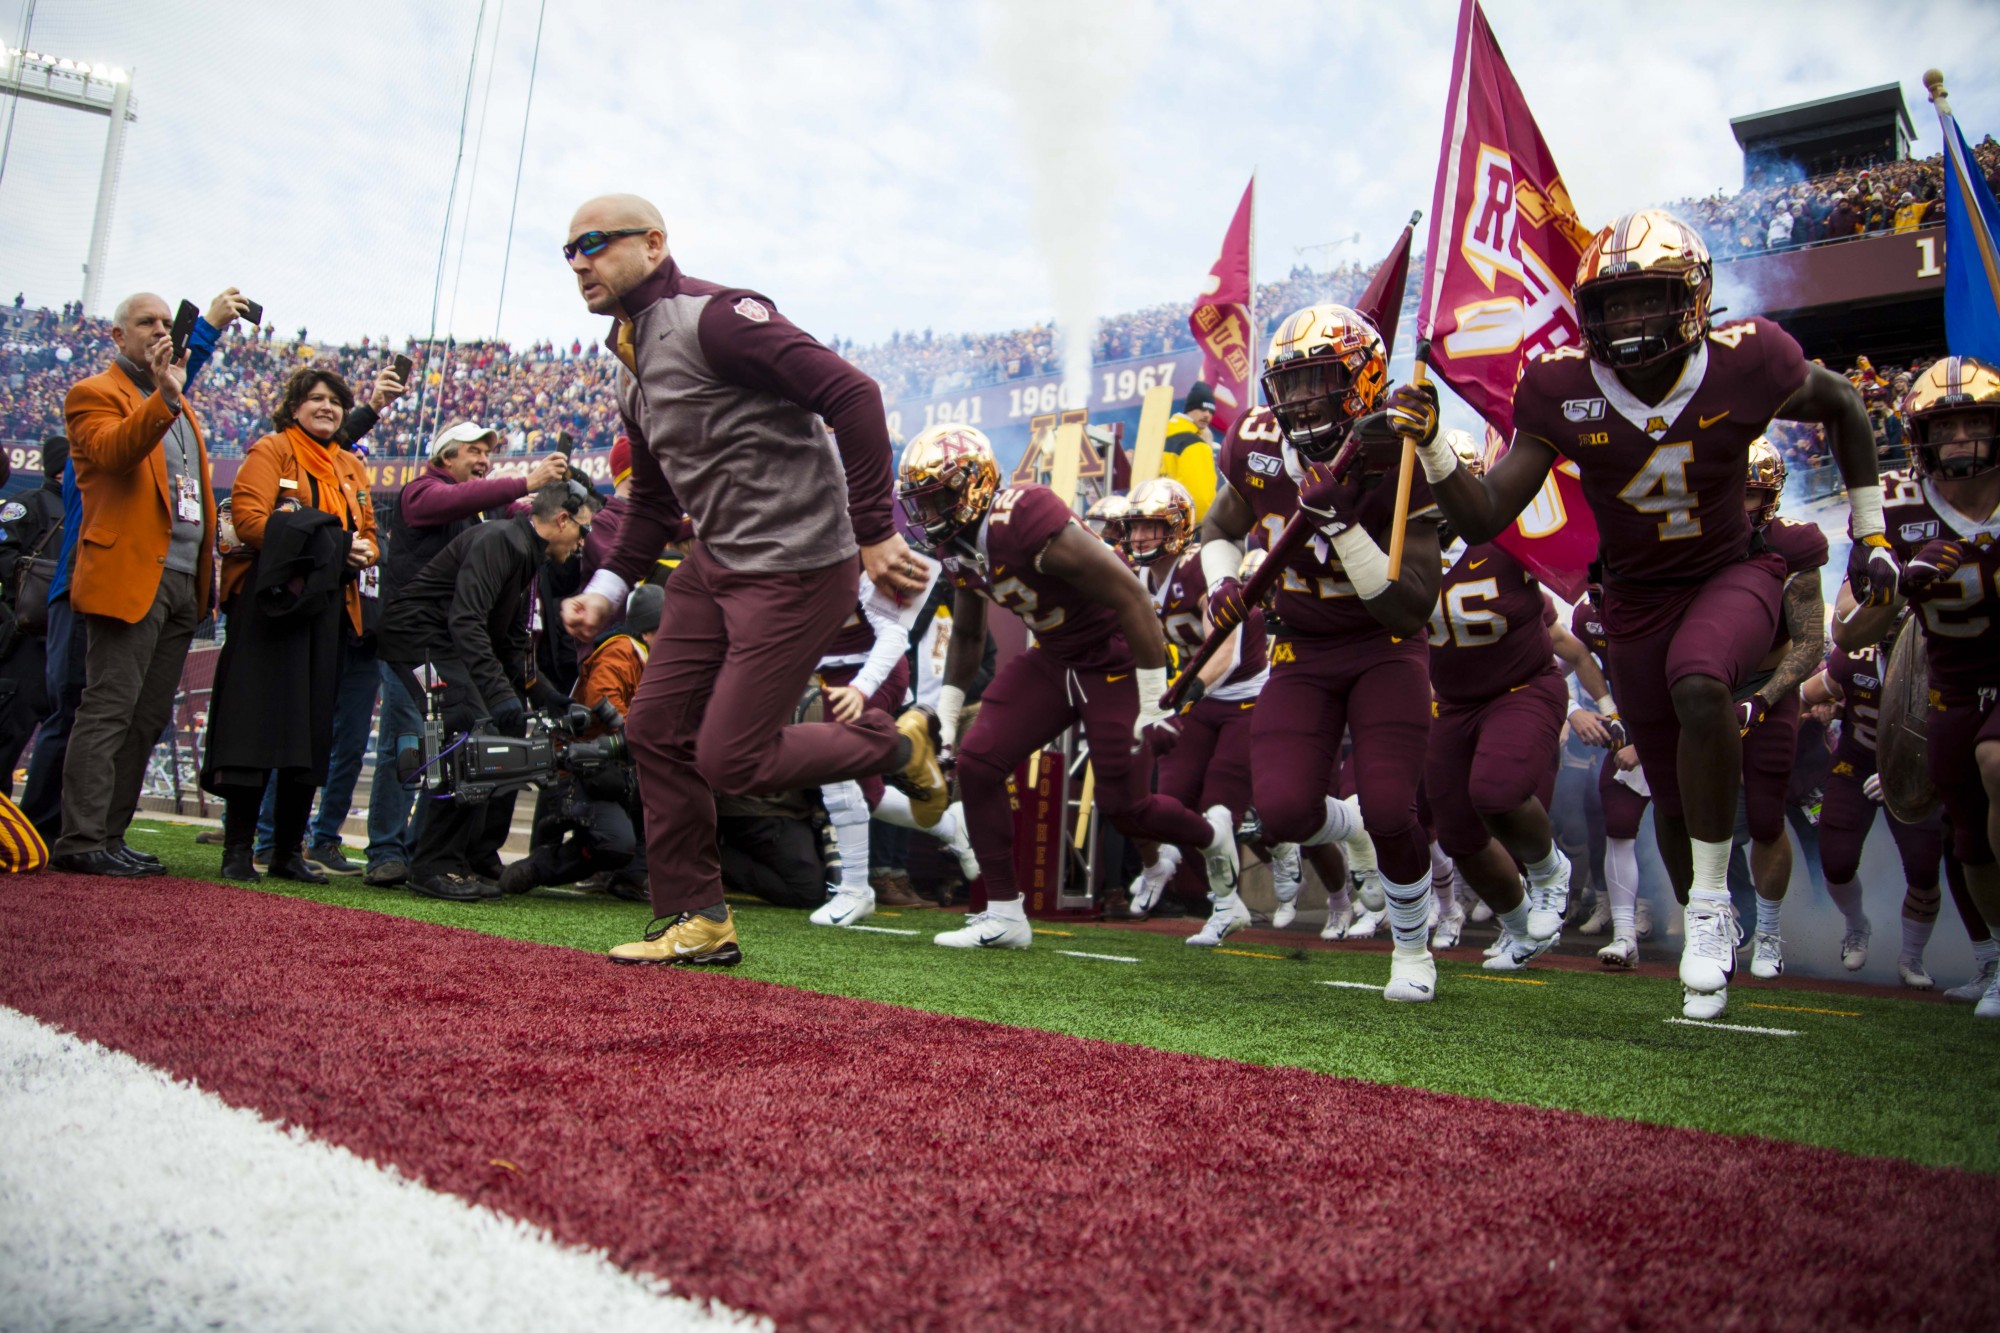 Head Coach PJ Fleck leads the team out of the tunnel at TCF Bank Stadium on Saturday, Nov. 9. The Gophers defeated Penn State 31-26 to bring their record to 9-0. A first since 1904. 